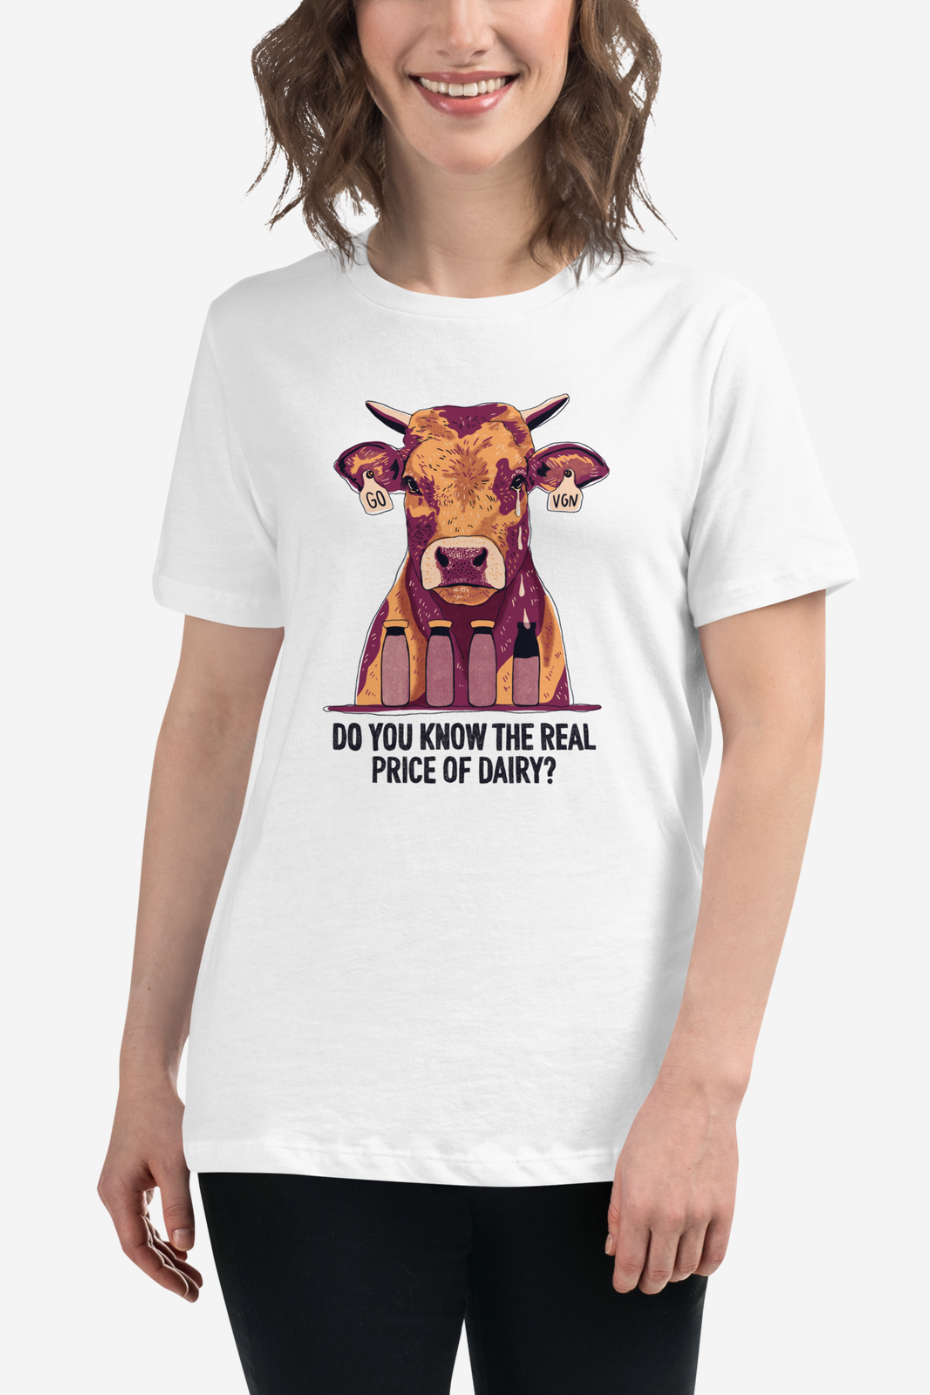 The Real Price of Dairy Women's Relaxed T-Shirt